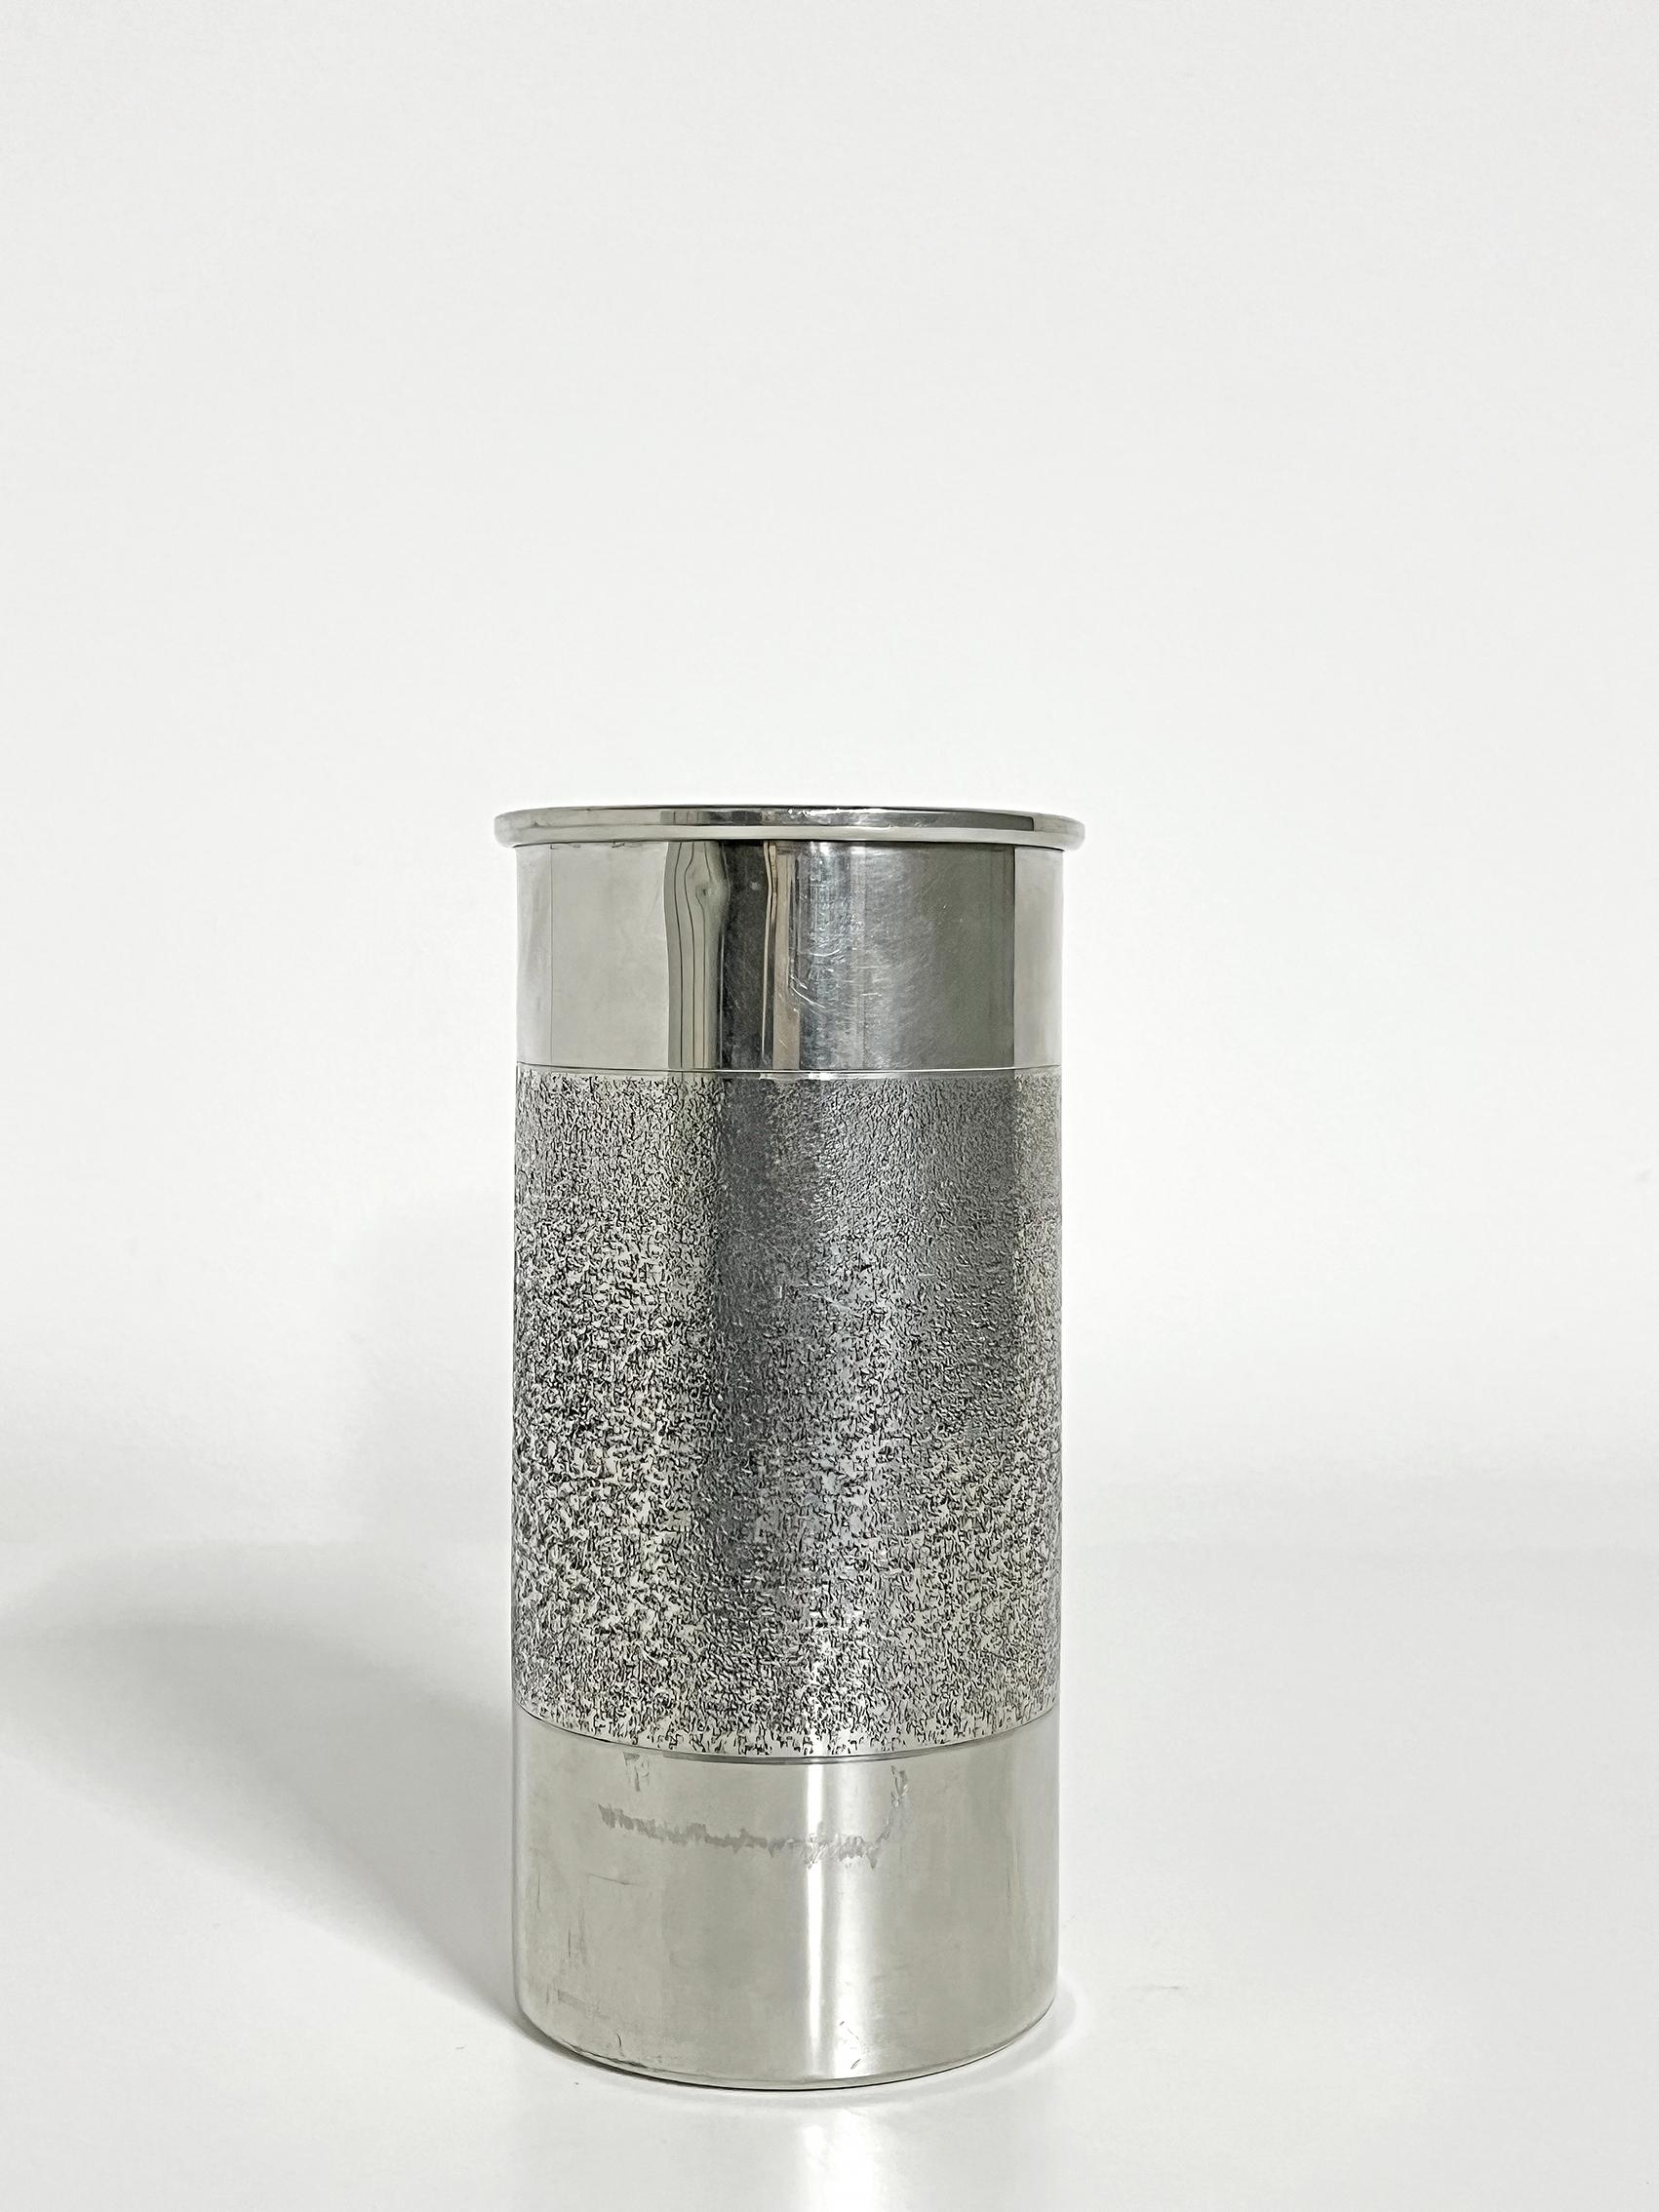 Cool scandinavian modern vase in pewter by K-E Palmberg for Alton F -1988.
Signed with makers mark.
Wear and patina consistent with age and use. 
Scratches and small dents, wear inside the vase. 